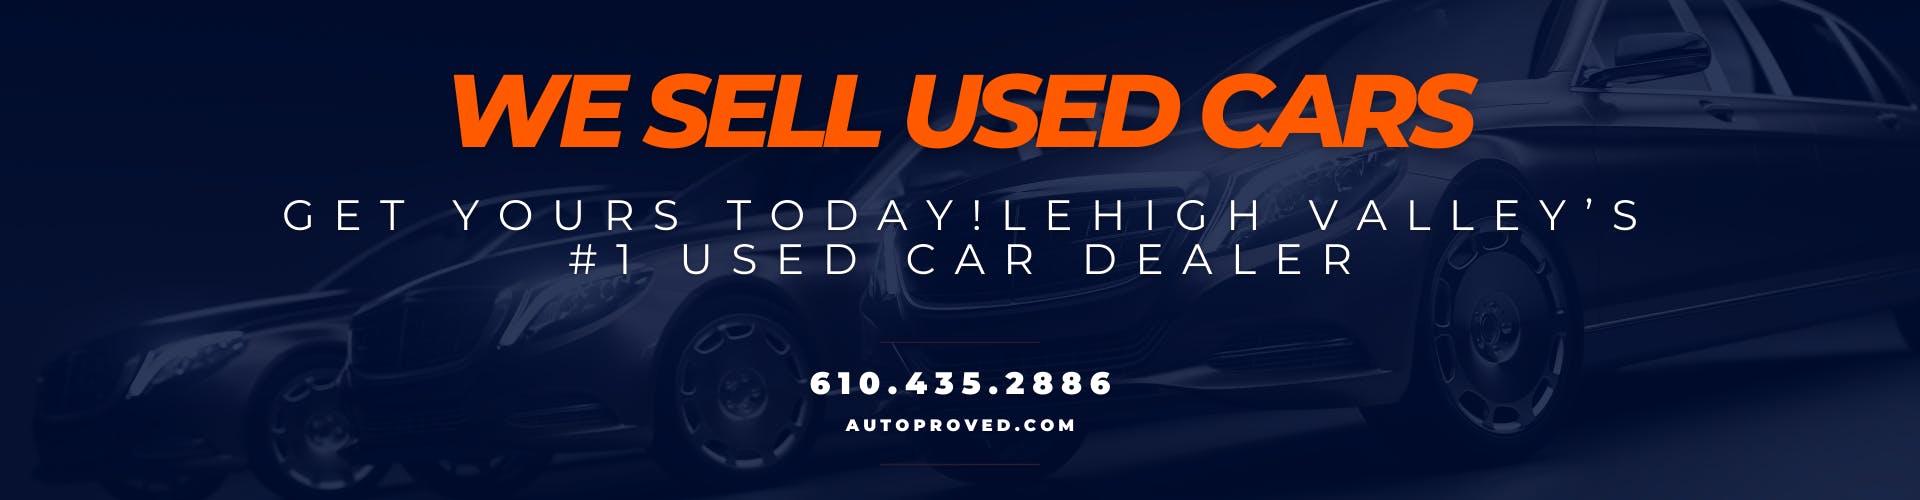 We sell Used Cars